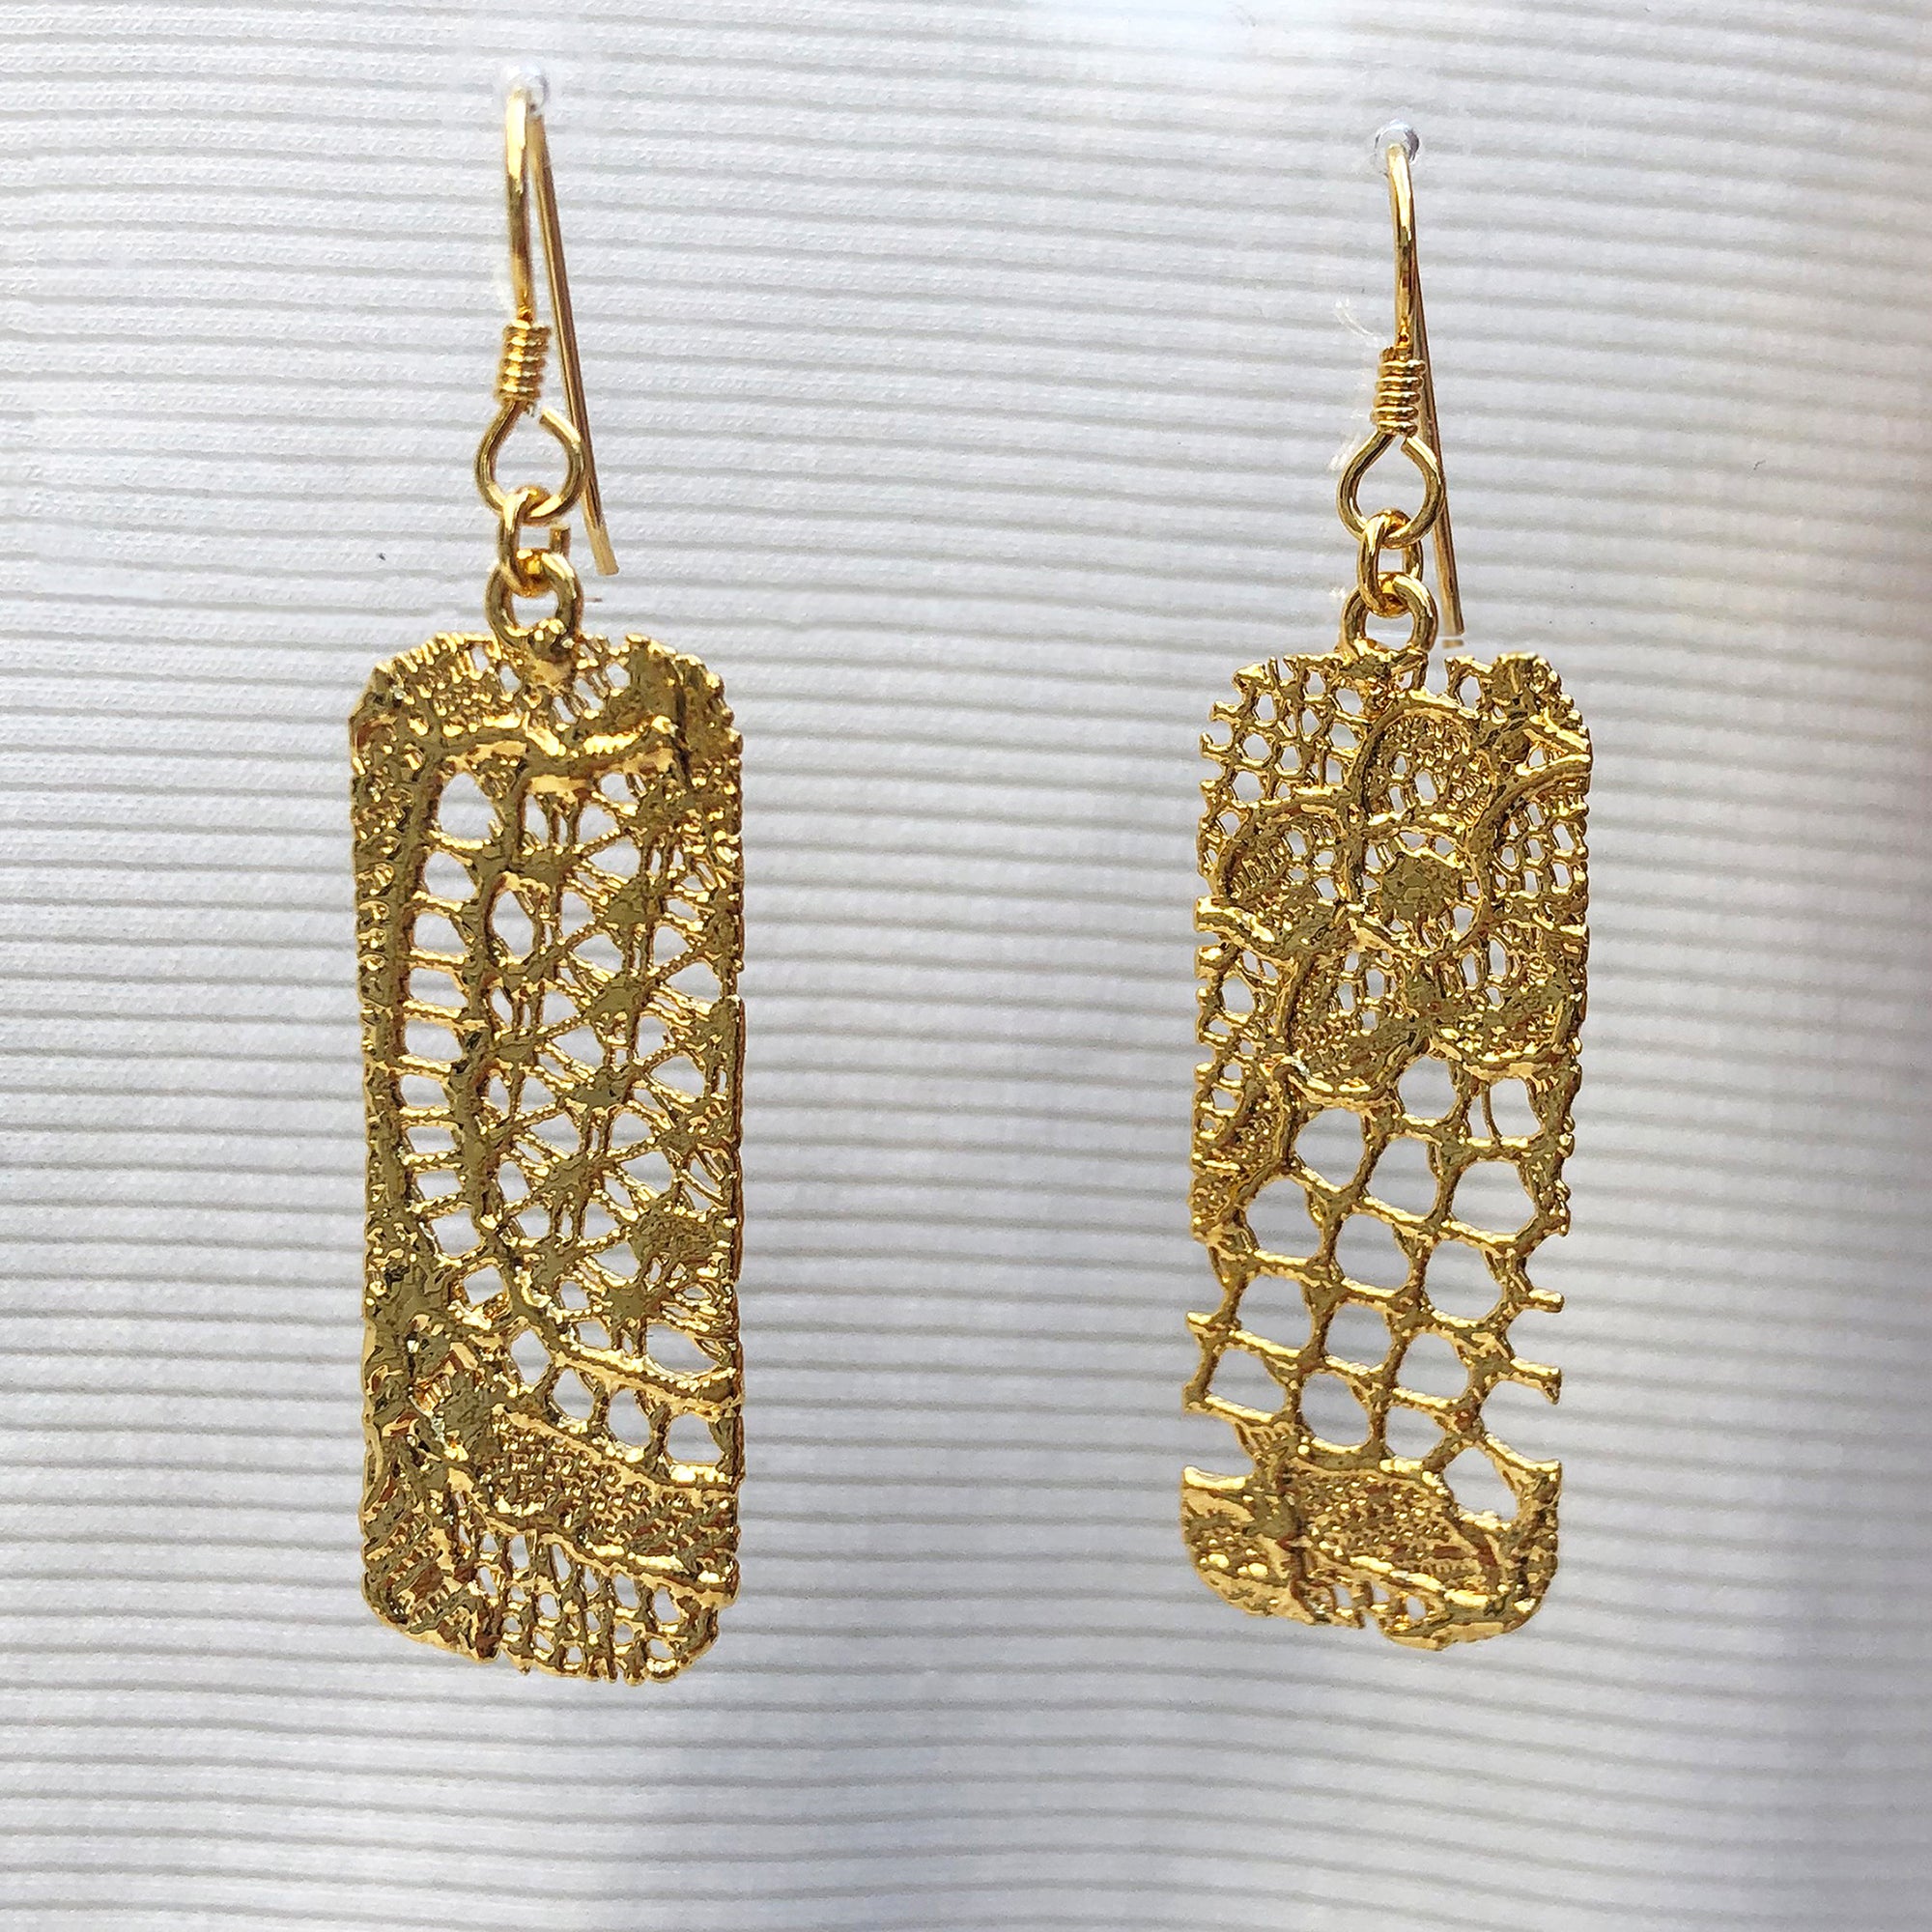 Brilliant Rectangular 24k gold Lace Earrings with French Hooks. Perfect 13th Anniversary Gift. Made with European Chantilly lace.